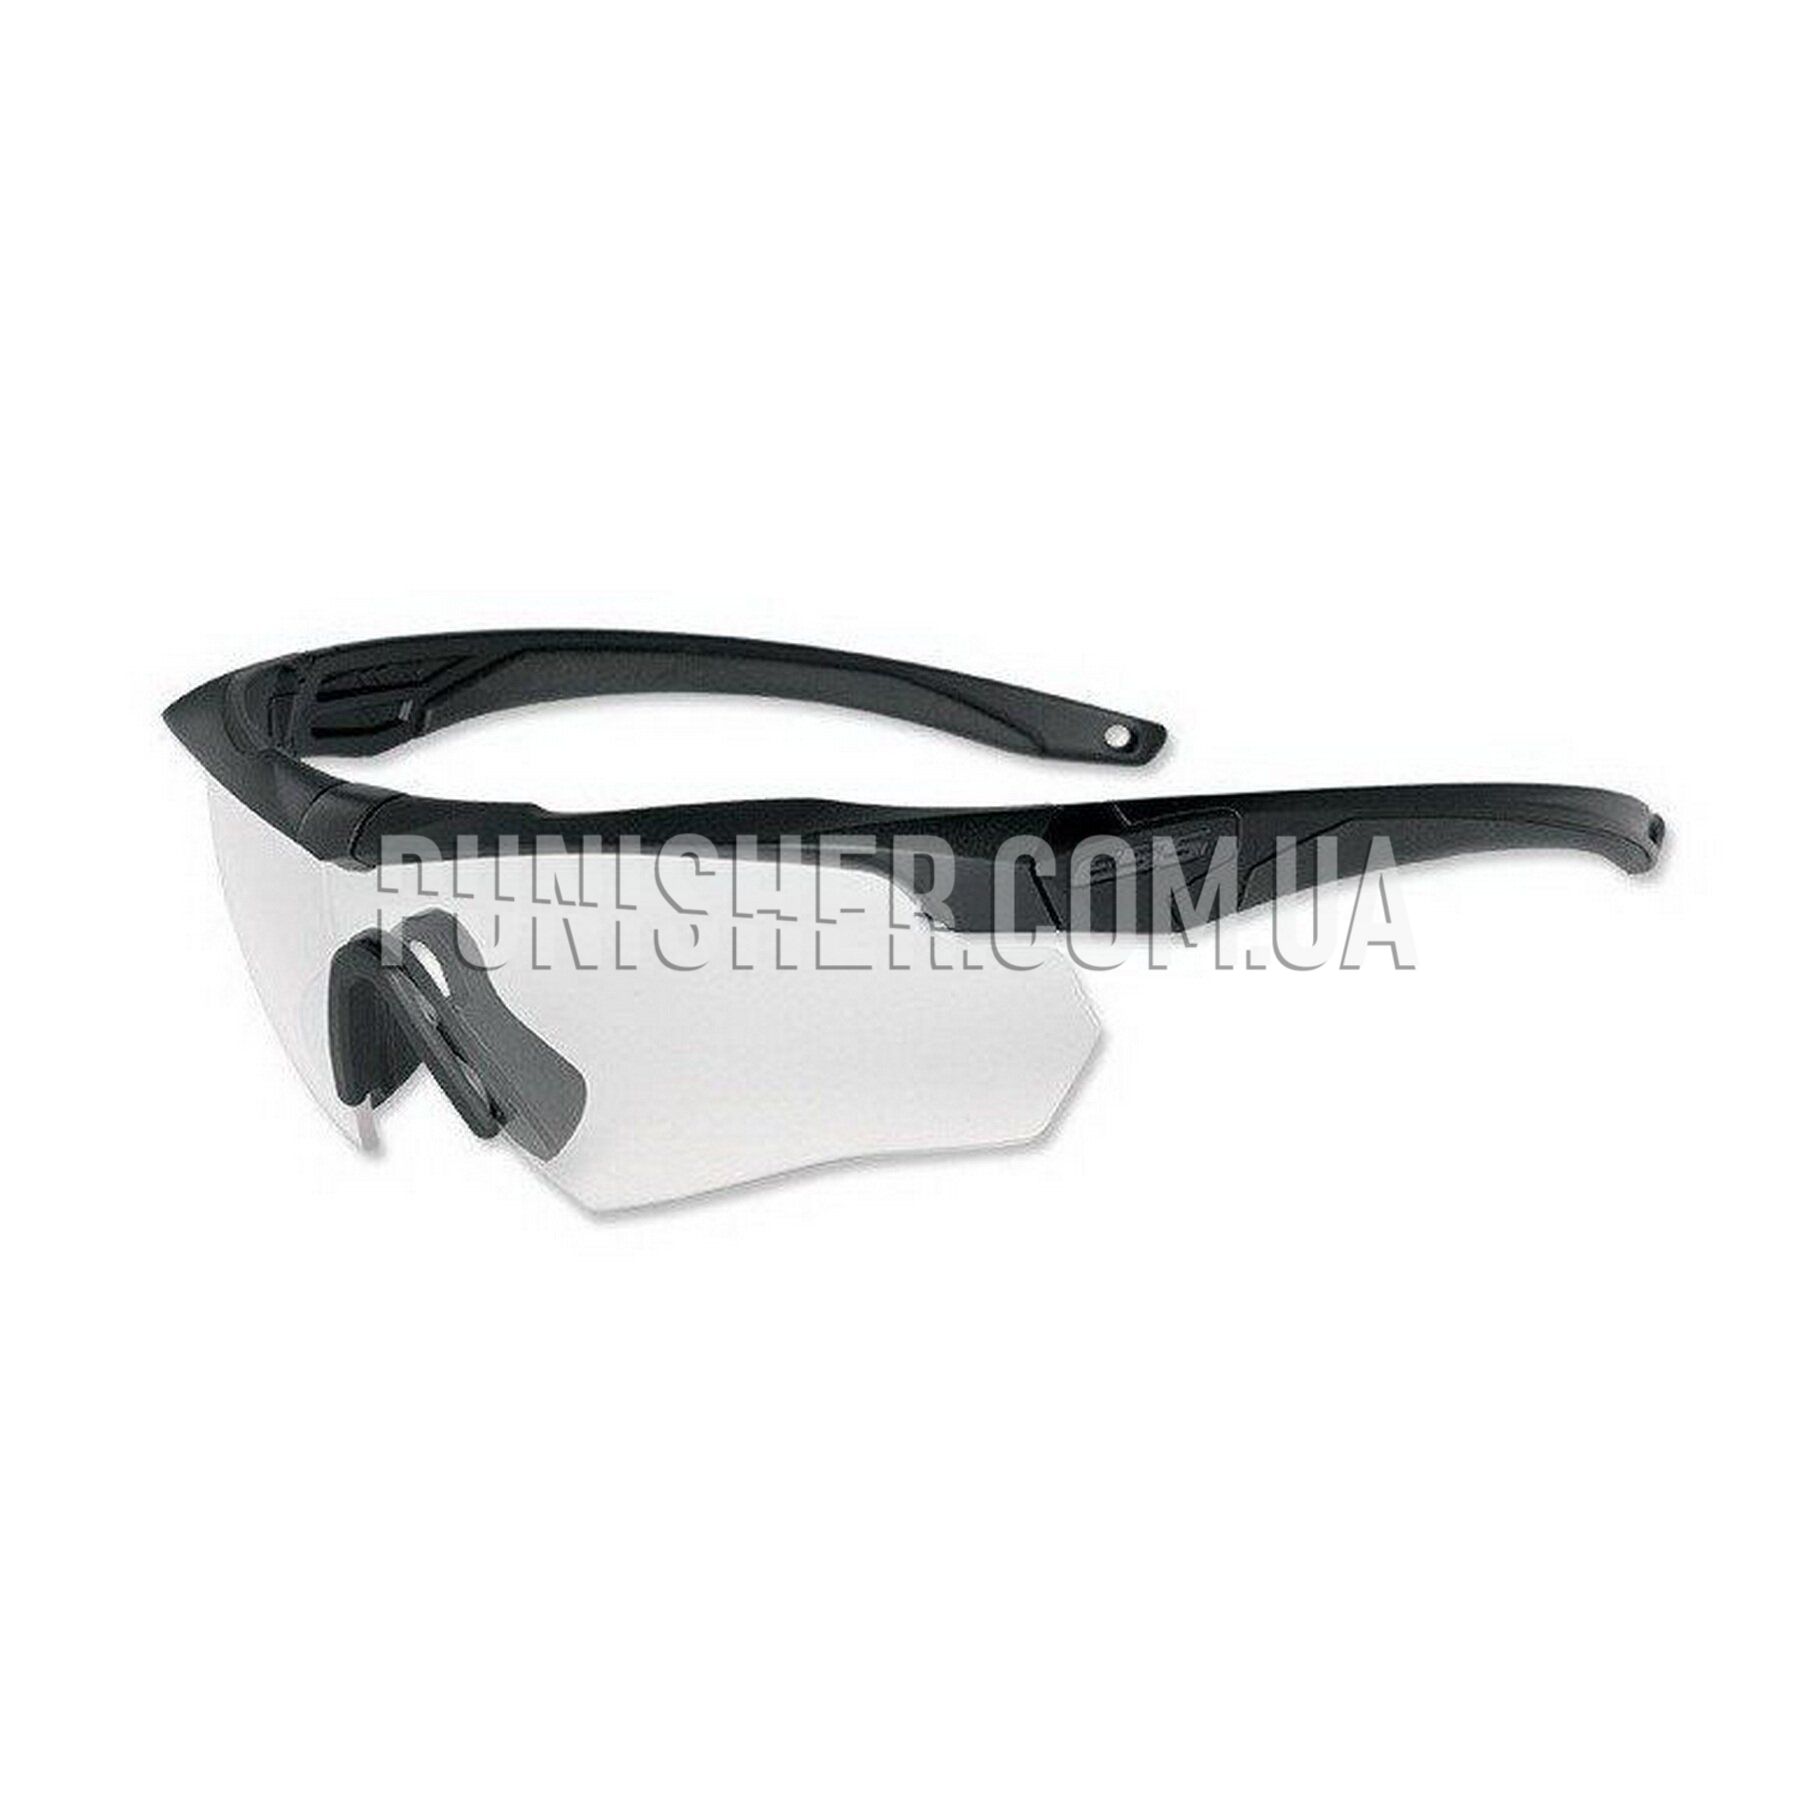 ESS Crossbow Ballistic Eyeshields with Clear Lens Black buy with 